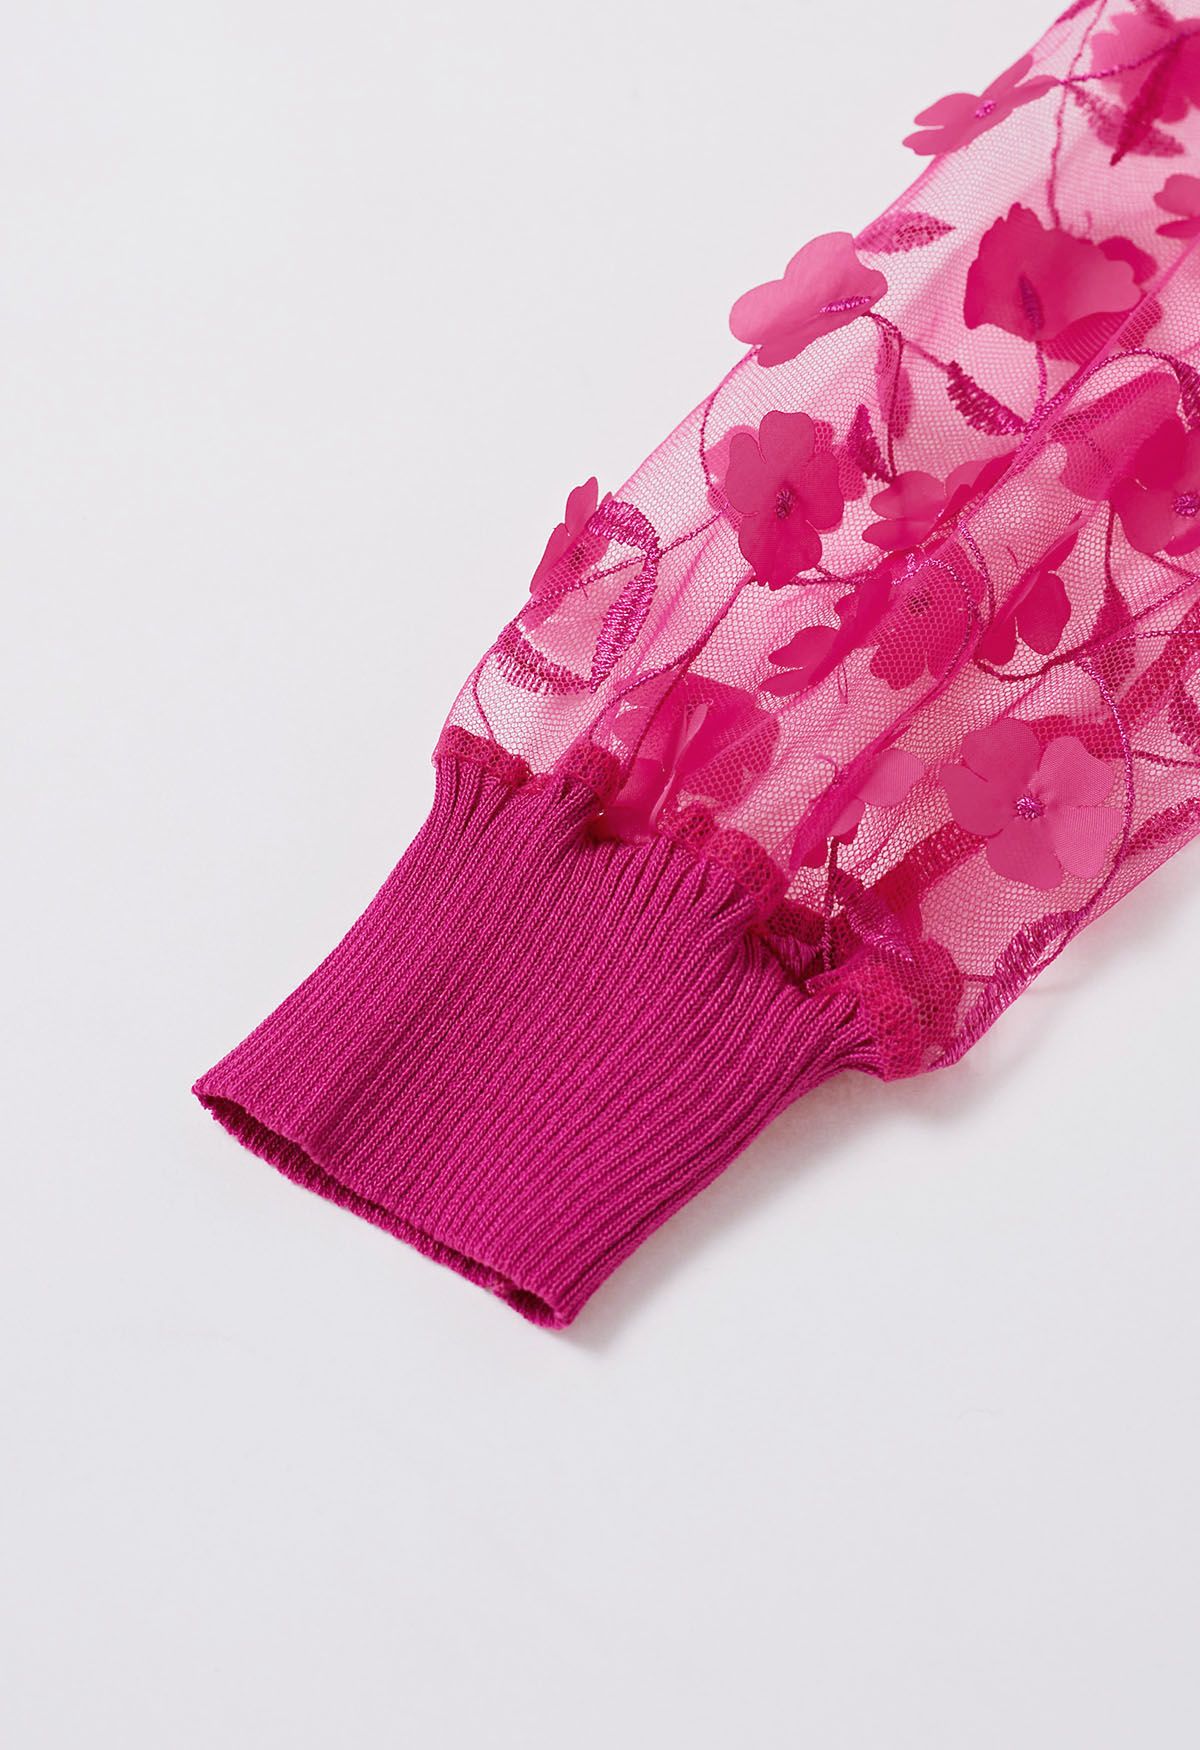 3D Floret Mesh Sleeves Spliced Knit Top in Hot Pink